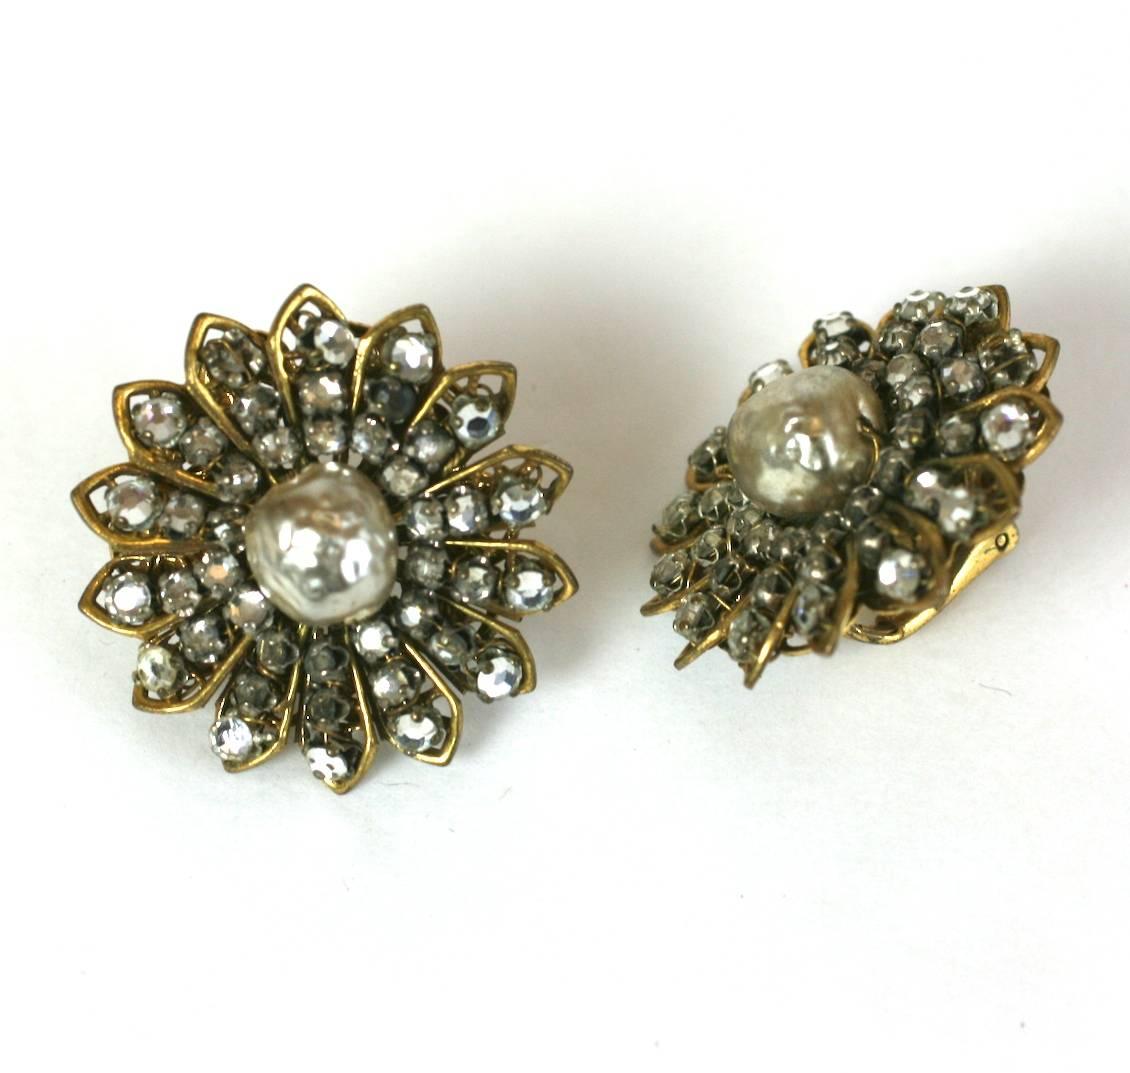 Miriam Haskell Floriform Earclips of signature faux baroque pearls and hand sewn crystal rose montes set onto Russian gilt filigree. Early horseshoe signature. Clip back fittings. 1940's USA. 
Ex. collection of fashion icon, DD Ryan. Excellent